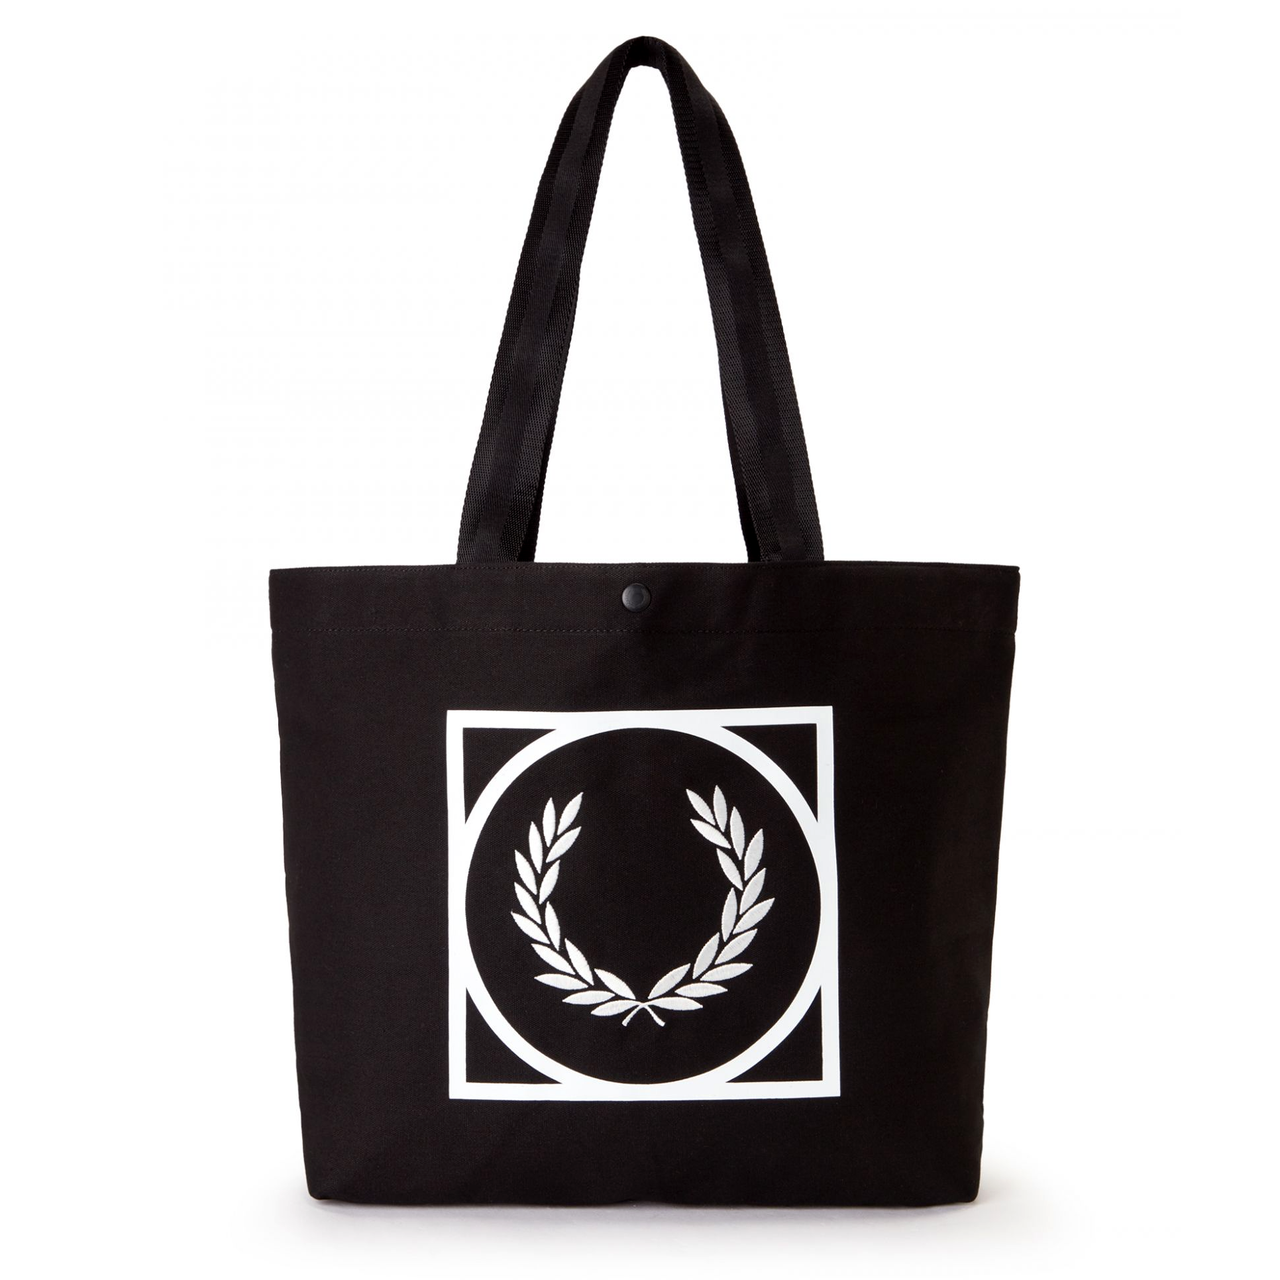 FRED PERRY LOGO GRAPHIC PRINT TOTE